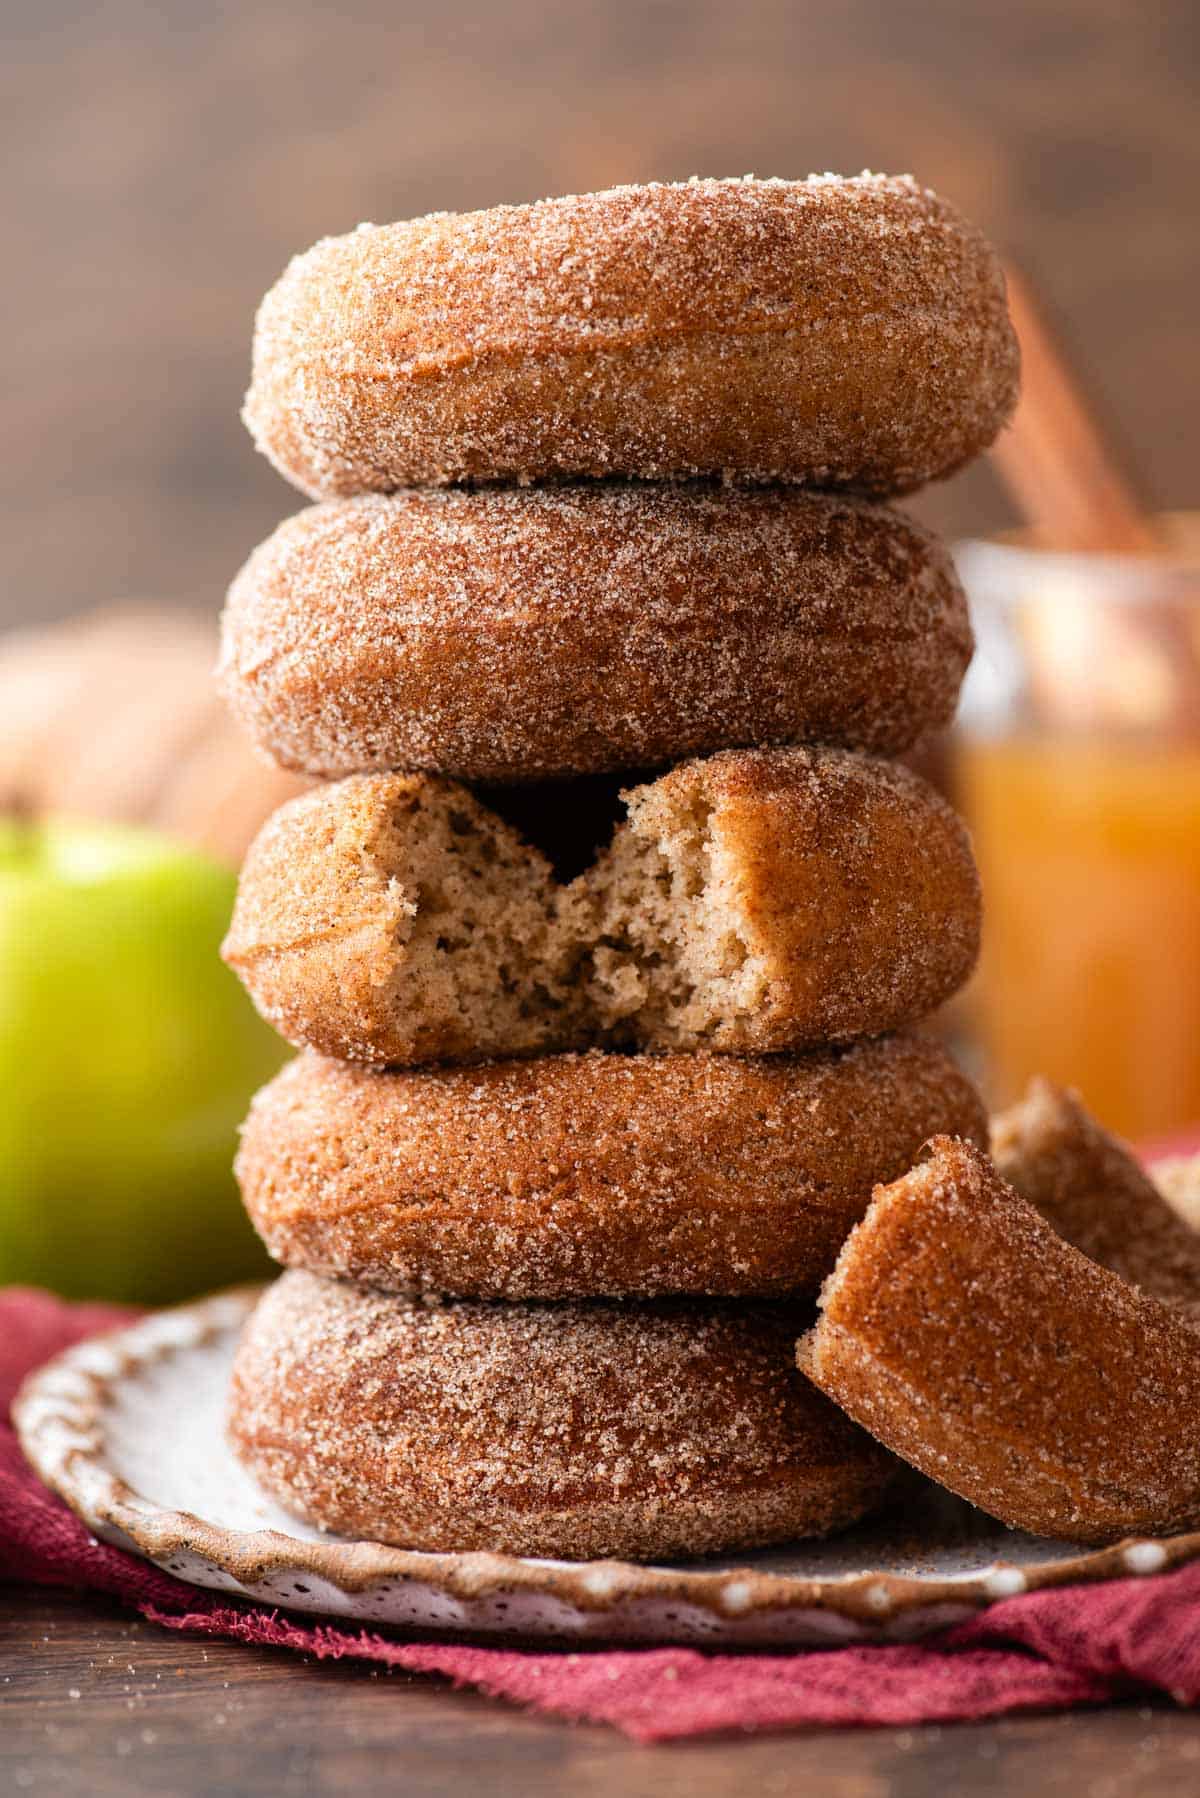 a stack of apple cider donuts with half a donut leaning on the side of it and the middle donut with a bite out, on a plate on top of a maroon towel, with a green apple and cup of apple cider in the background